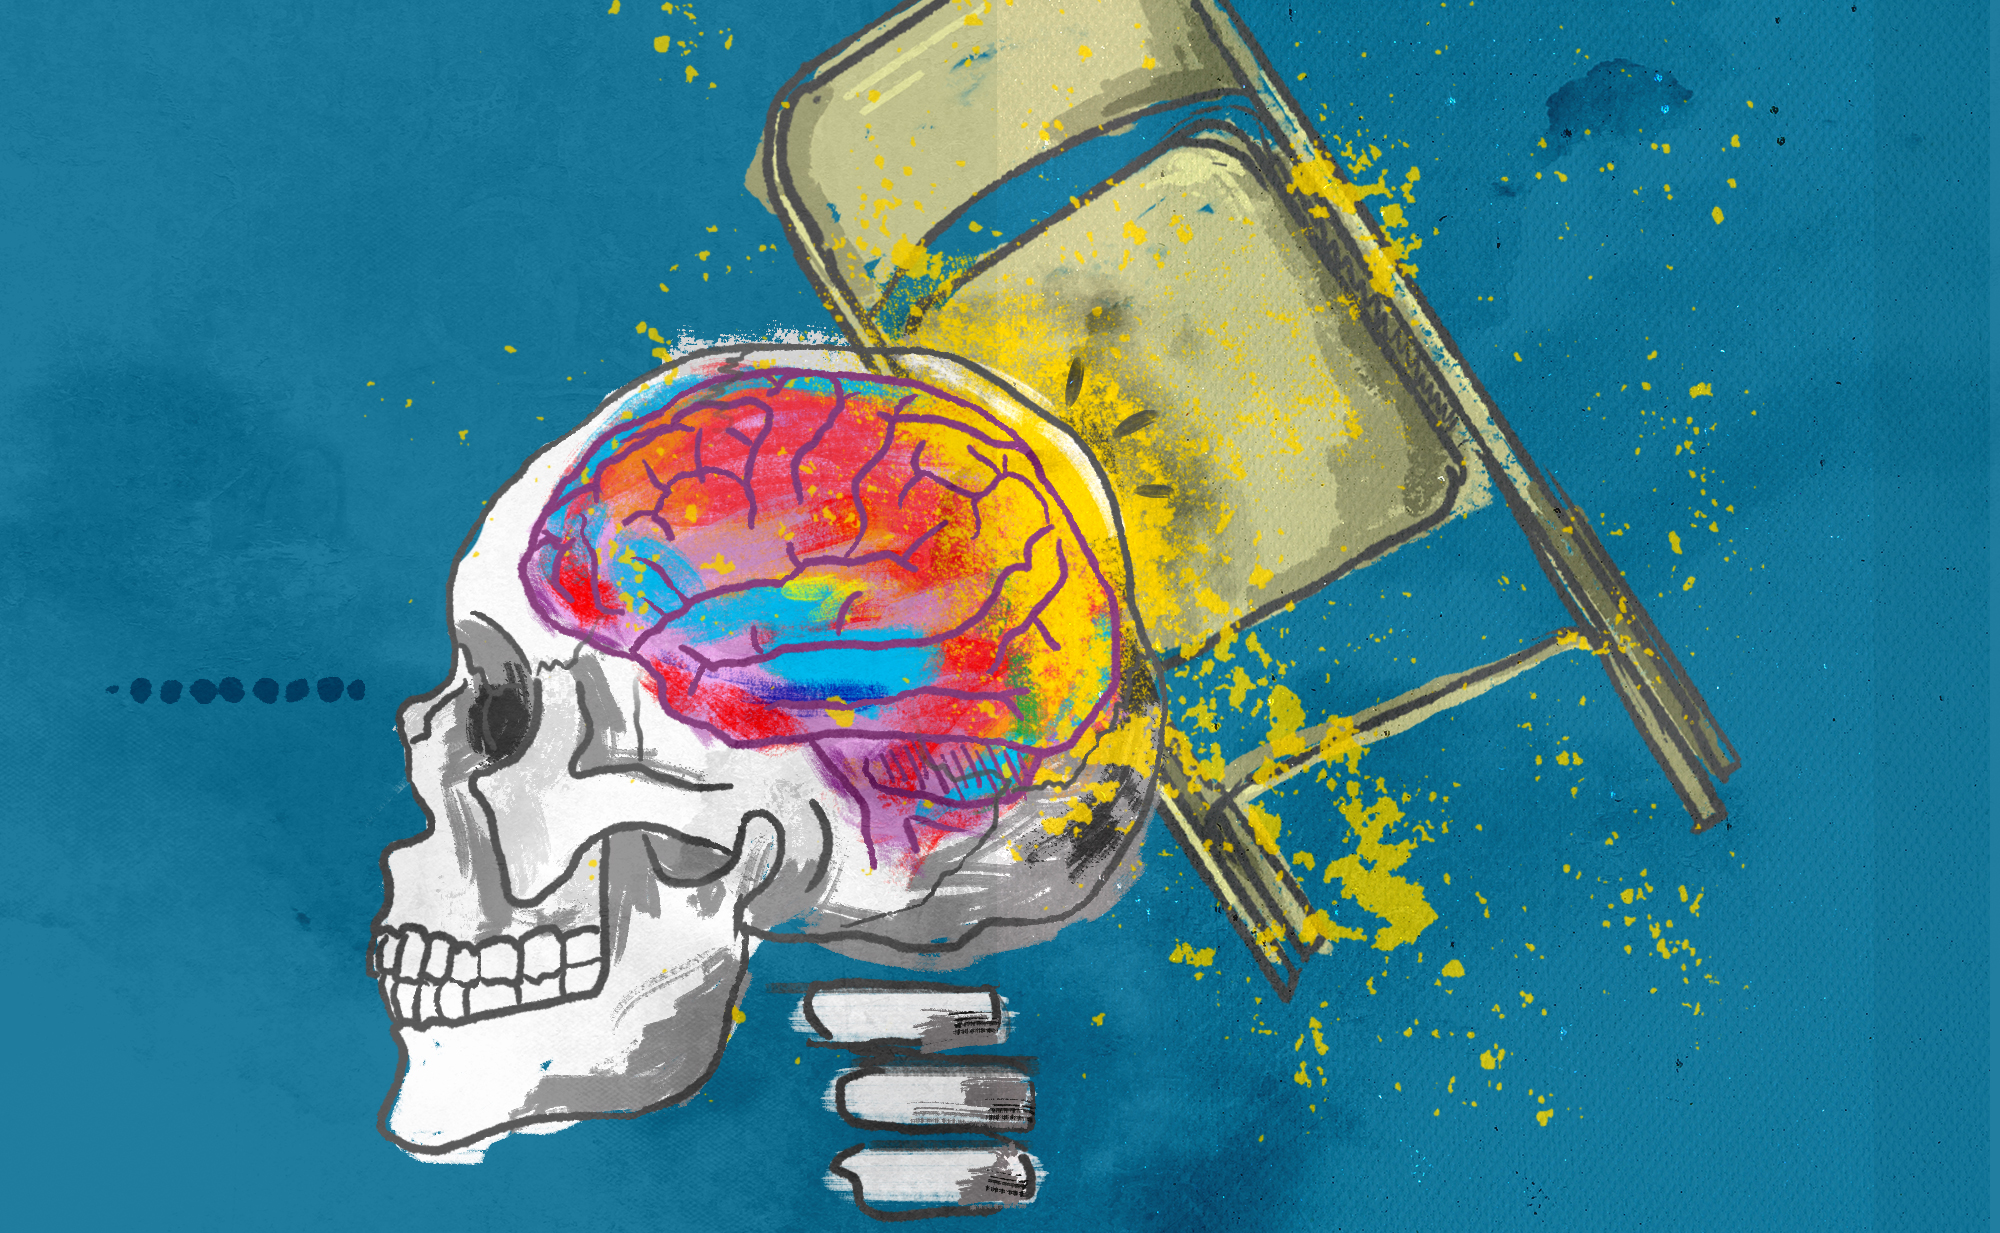 An illustration of a metal folding chair hitting a human skull that shows a brain inside.